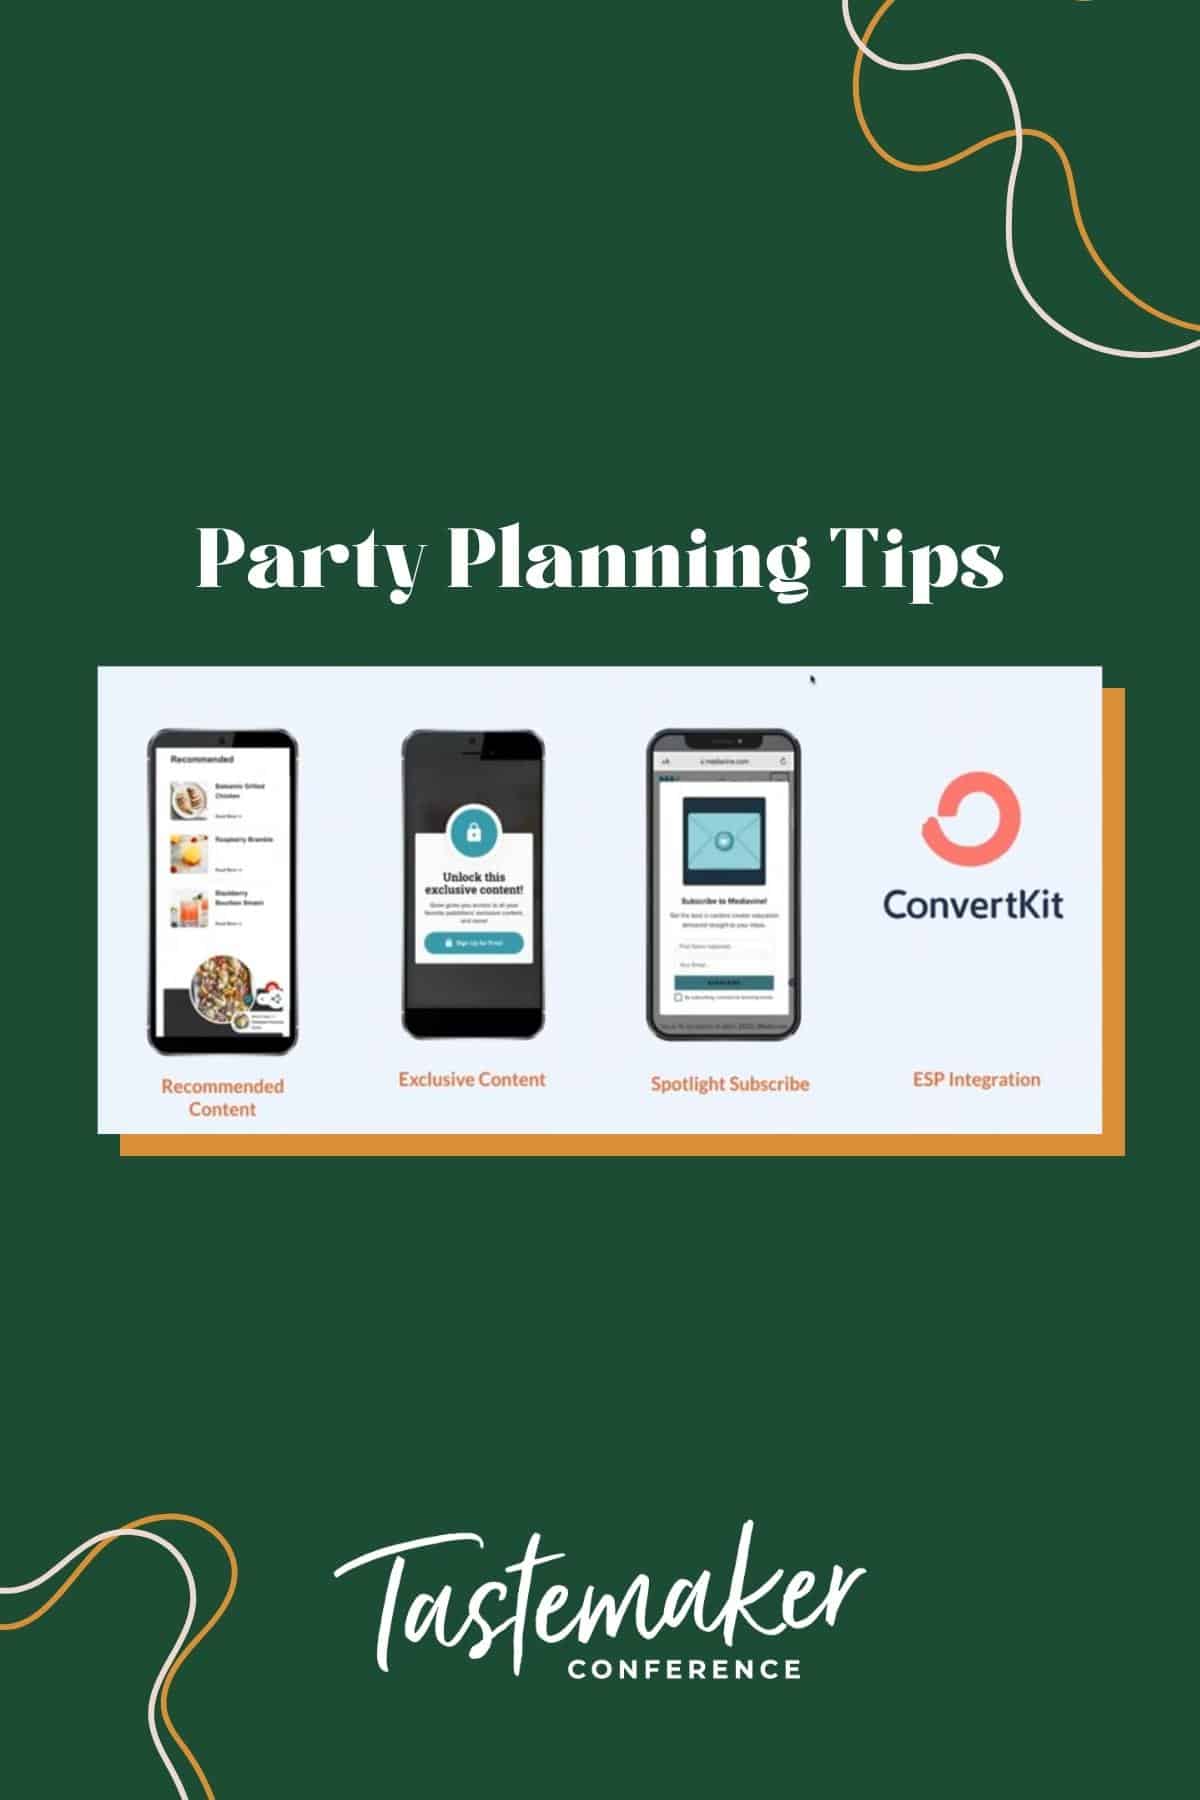 graphic reading party planning tips with screenshot from powerpoint with types of content